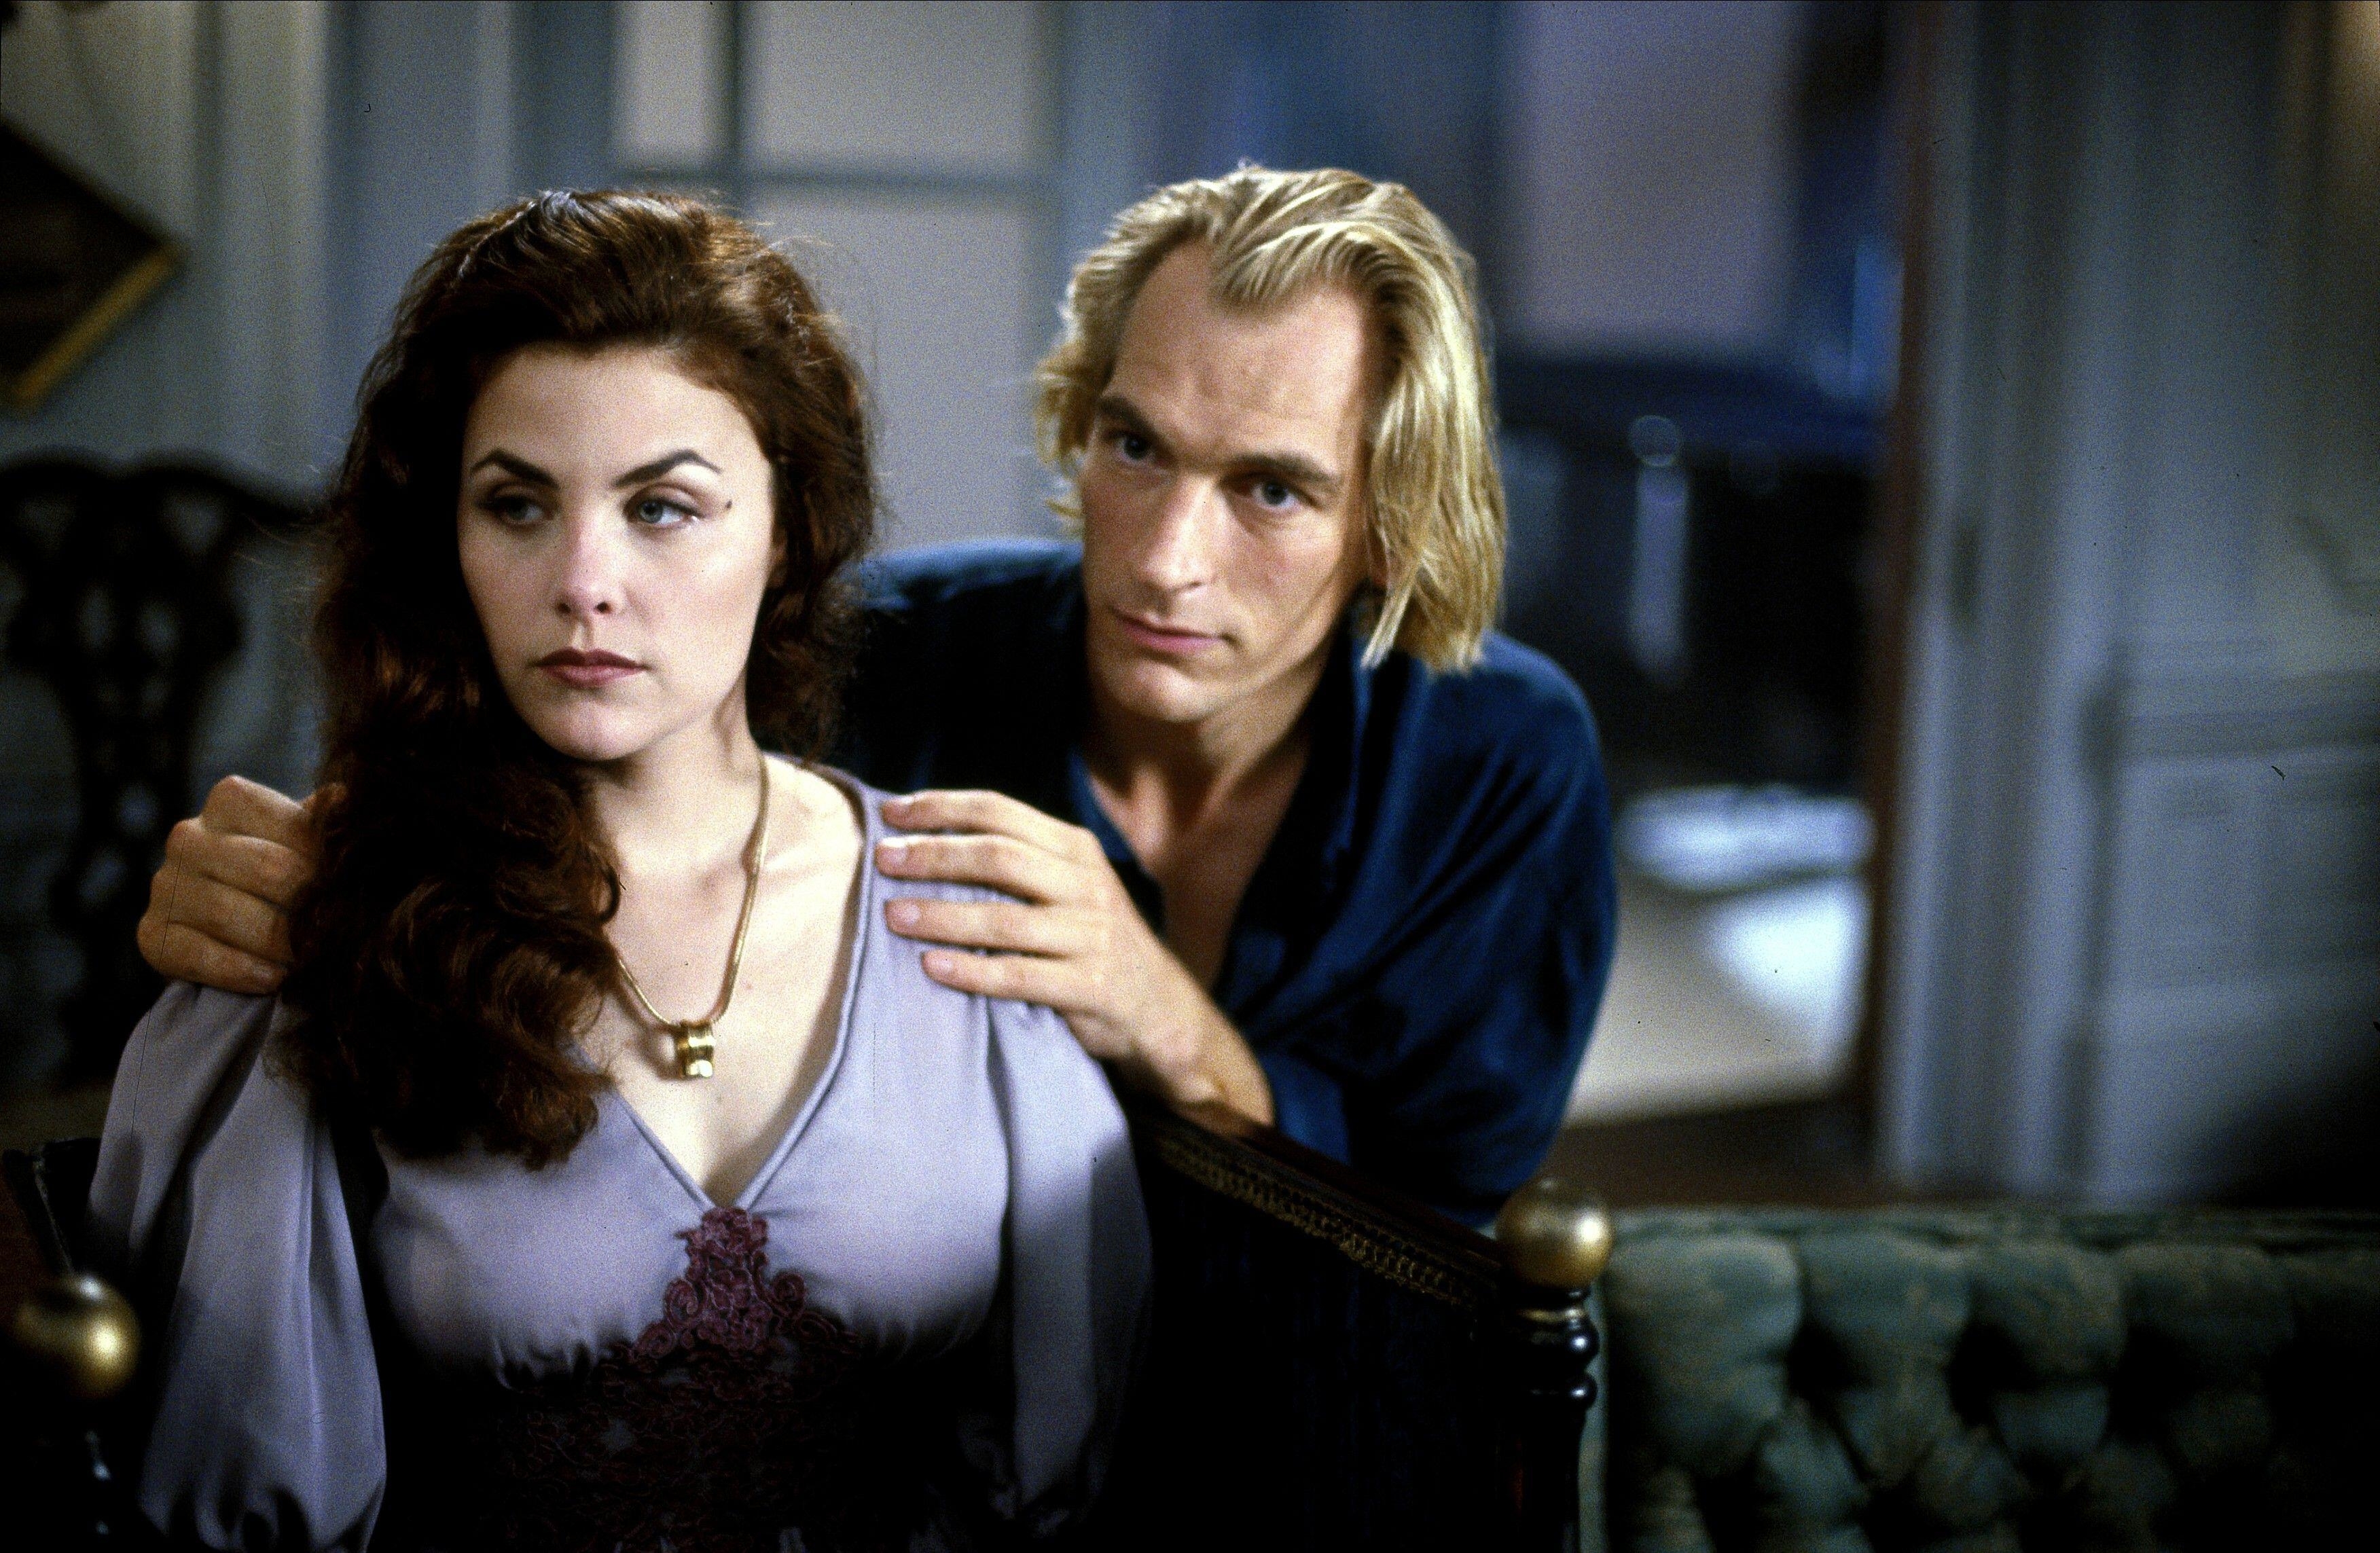 Julian Sands and Sherilyn Fenn sit together in a living room